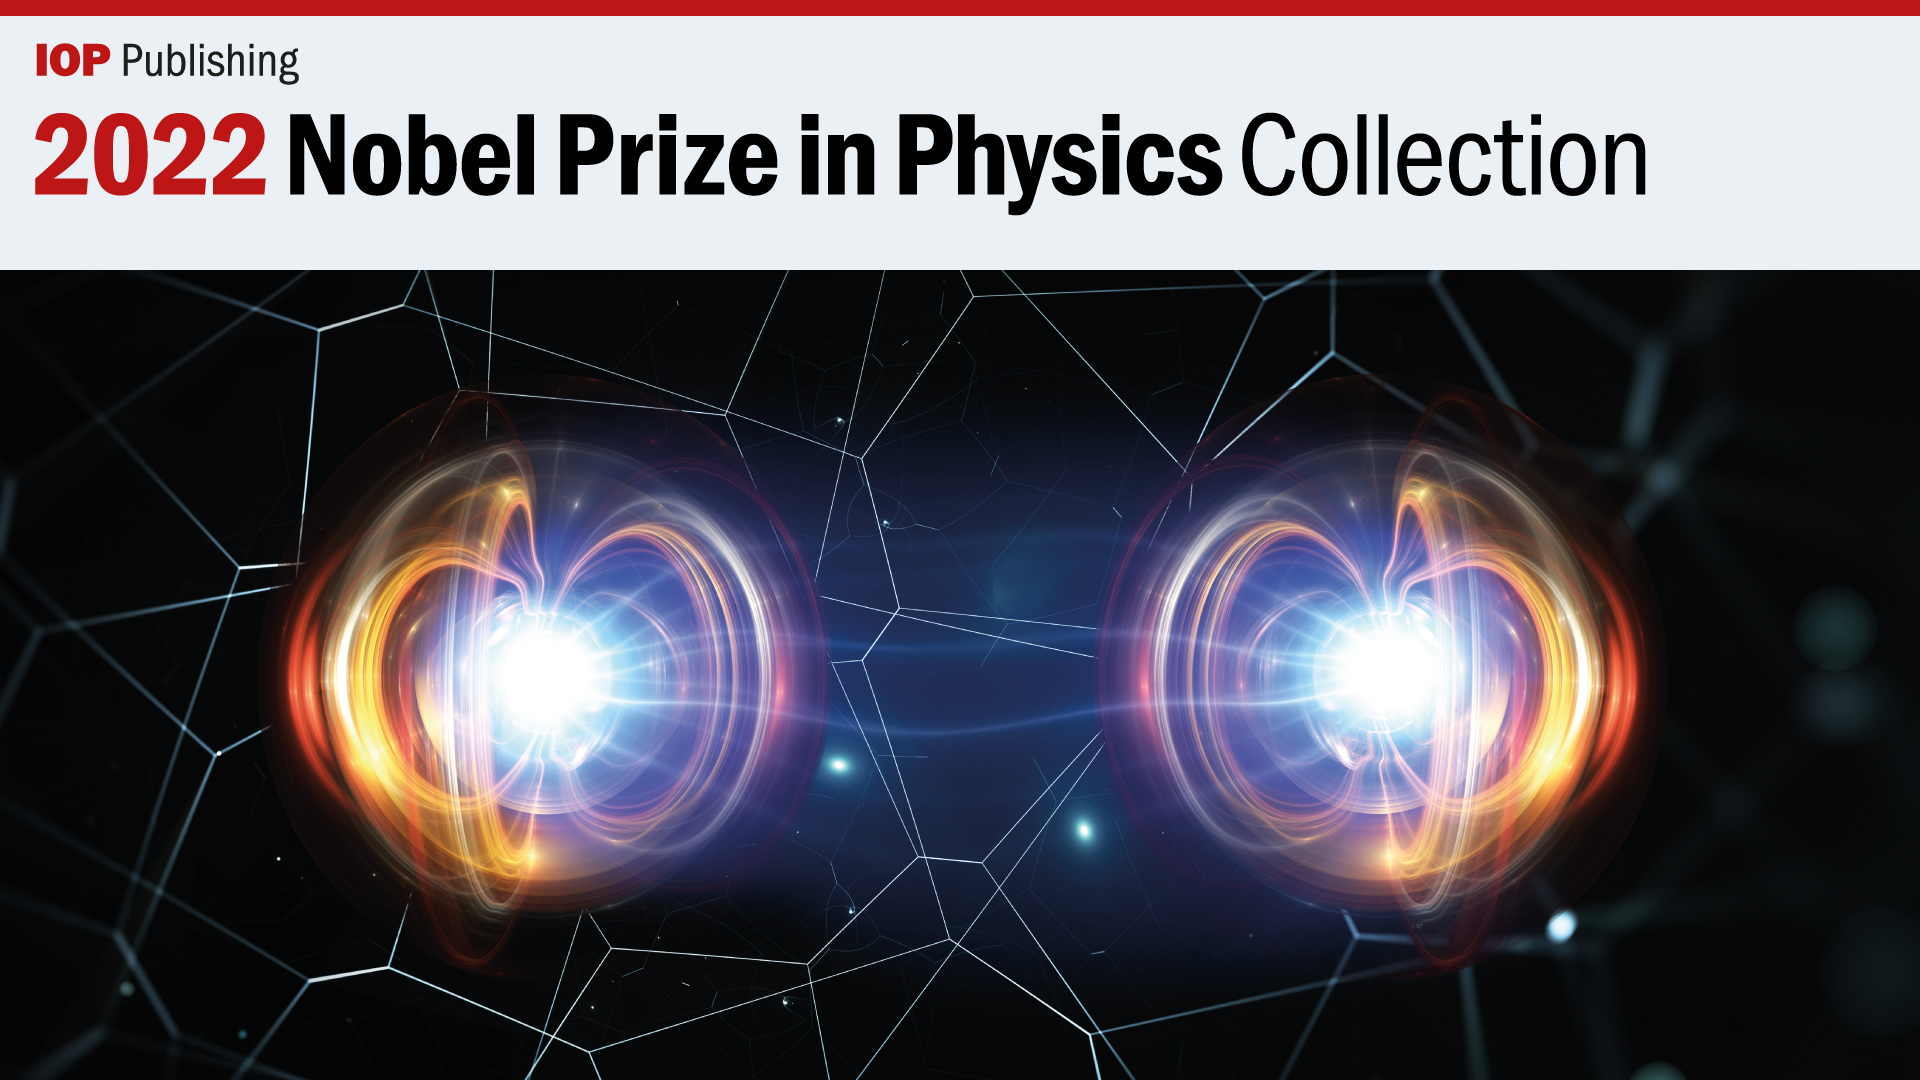 Congratulations to the Nobel Prize in Physics winners IOP Publishing